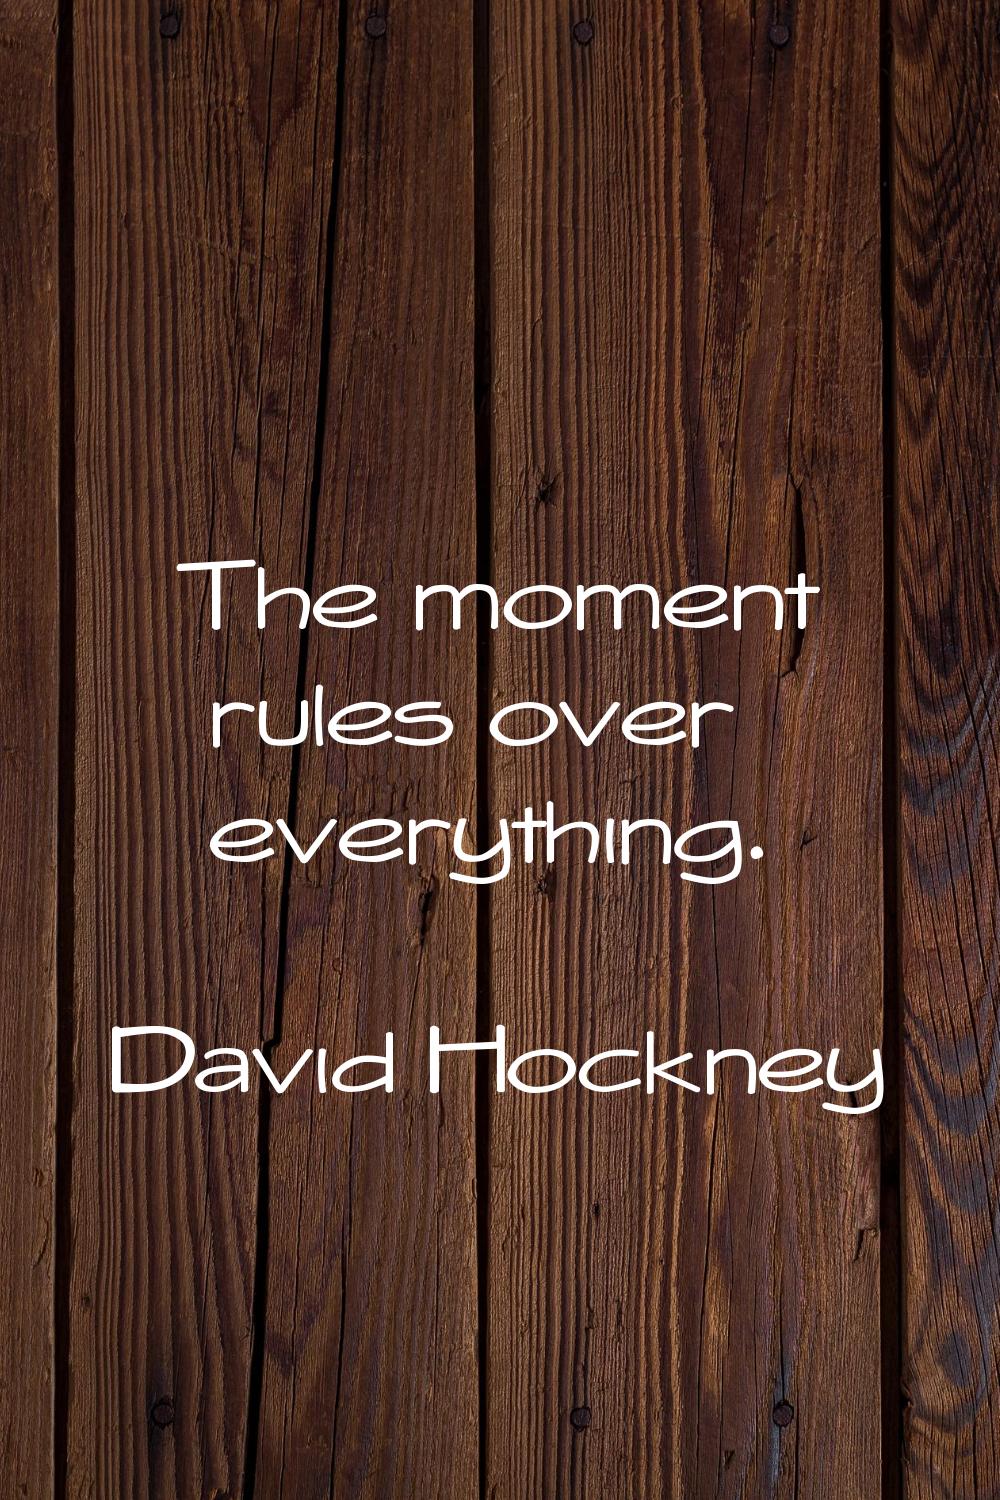 The moment rules over everything.